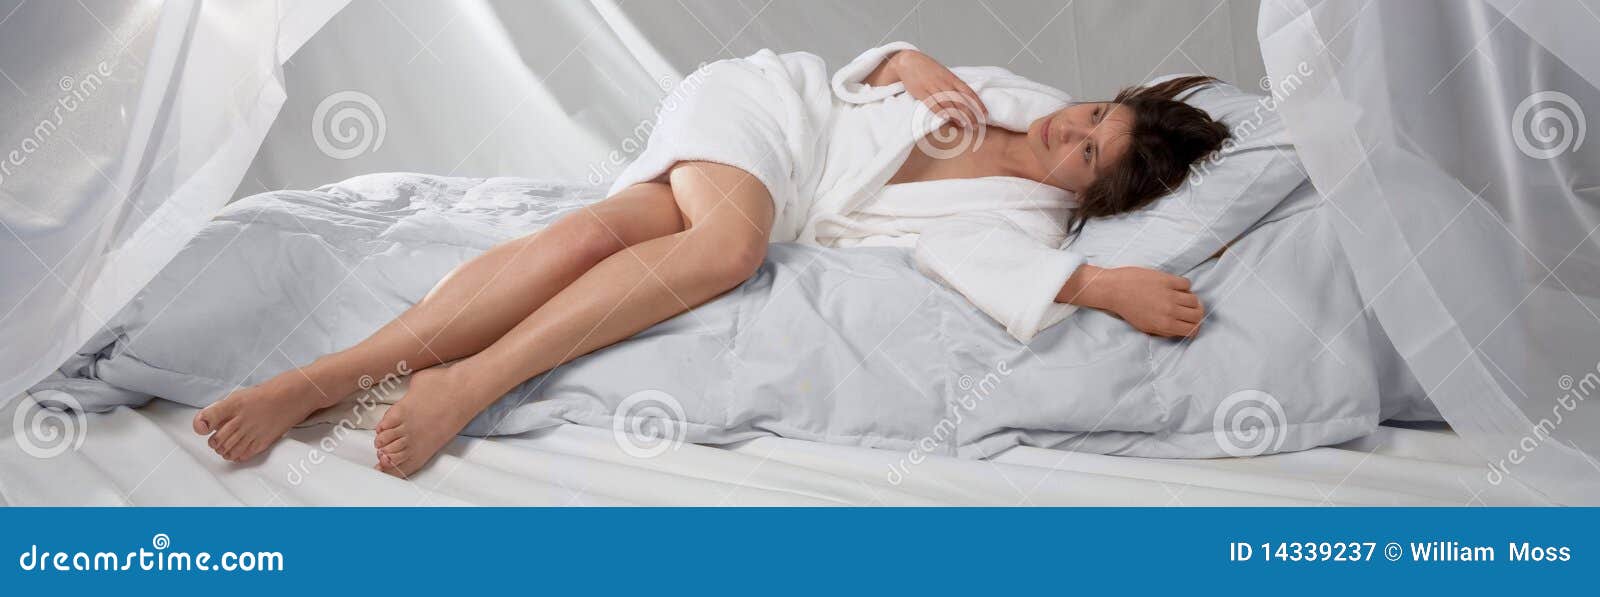 young woman in white bathrobe on white bed